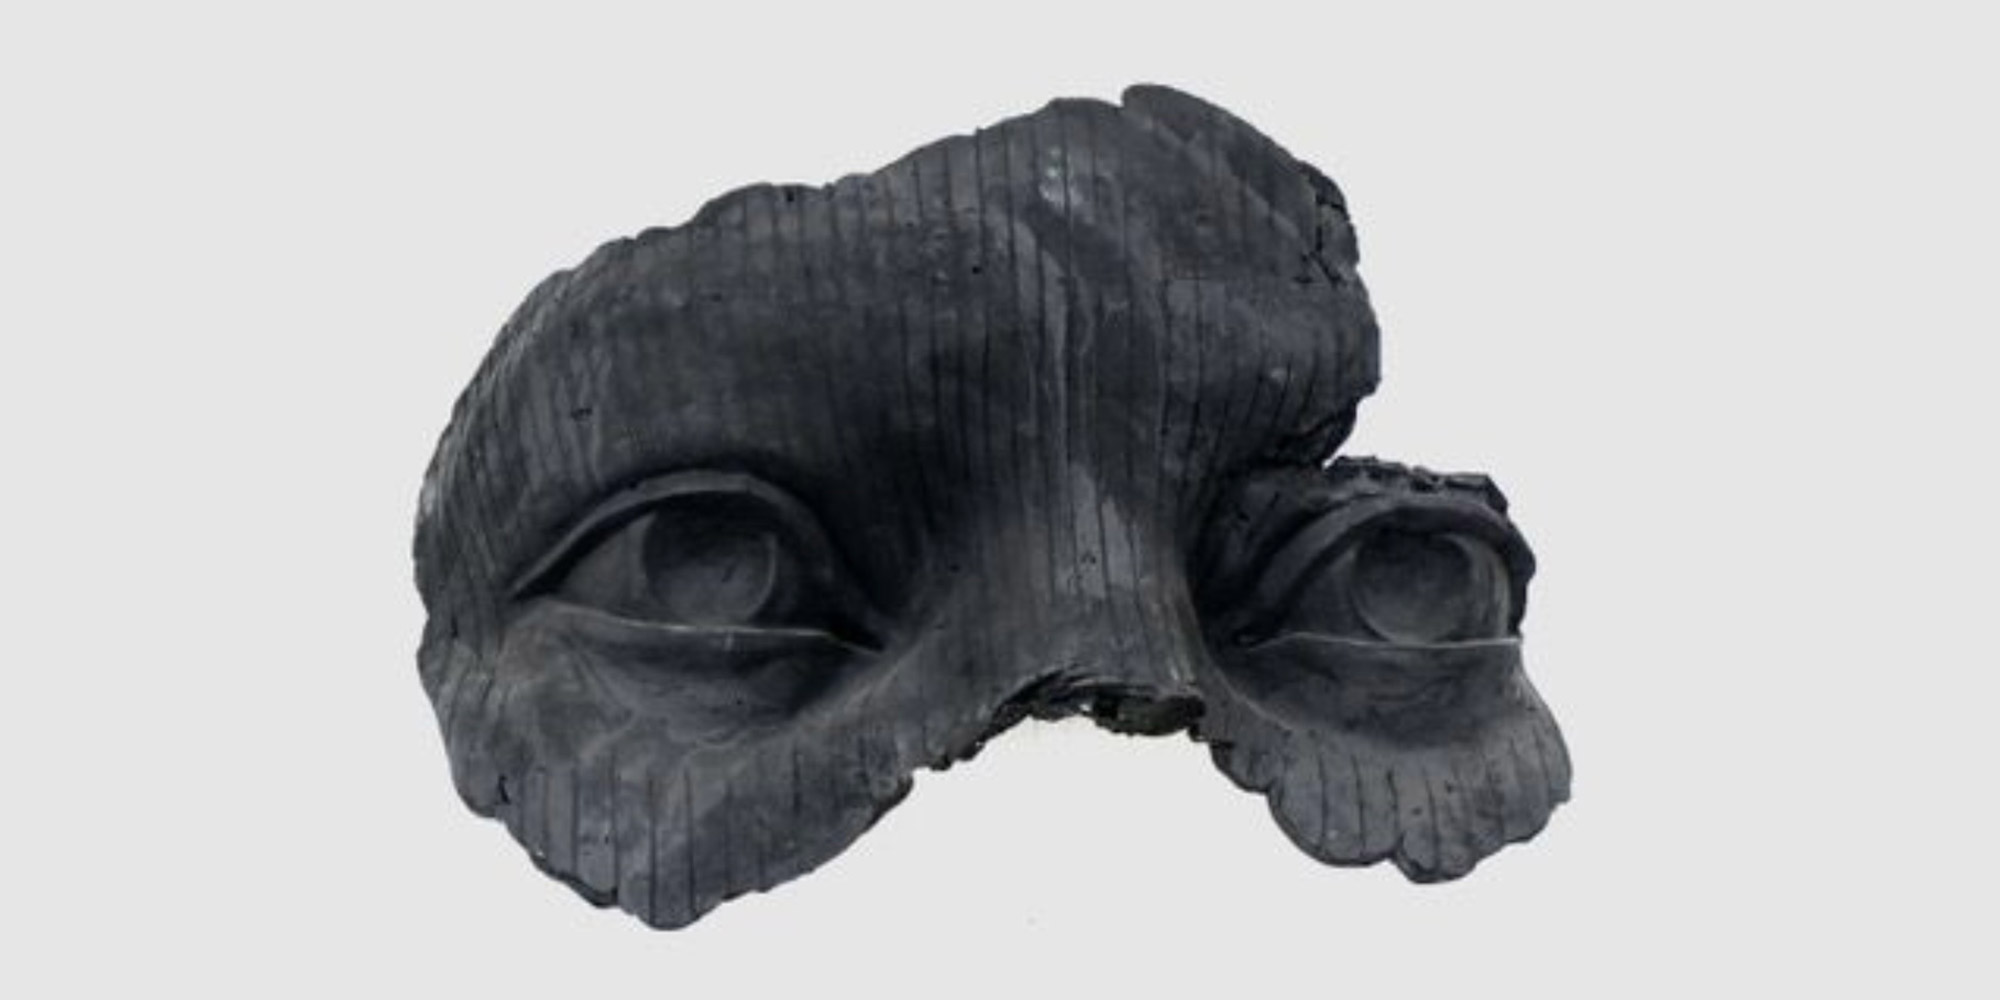 A black sculptural fragment of a face with both eyes and part of the nose, as in a mask.